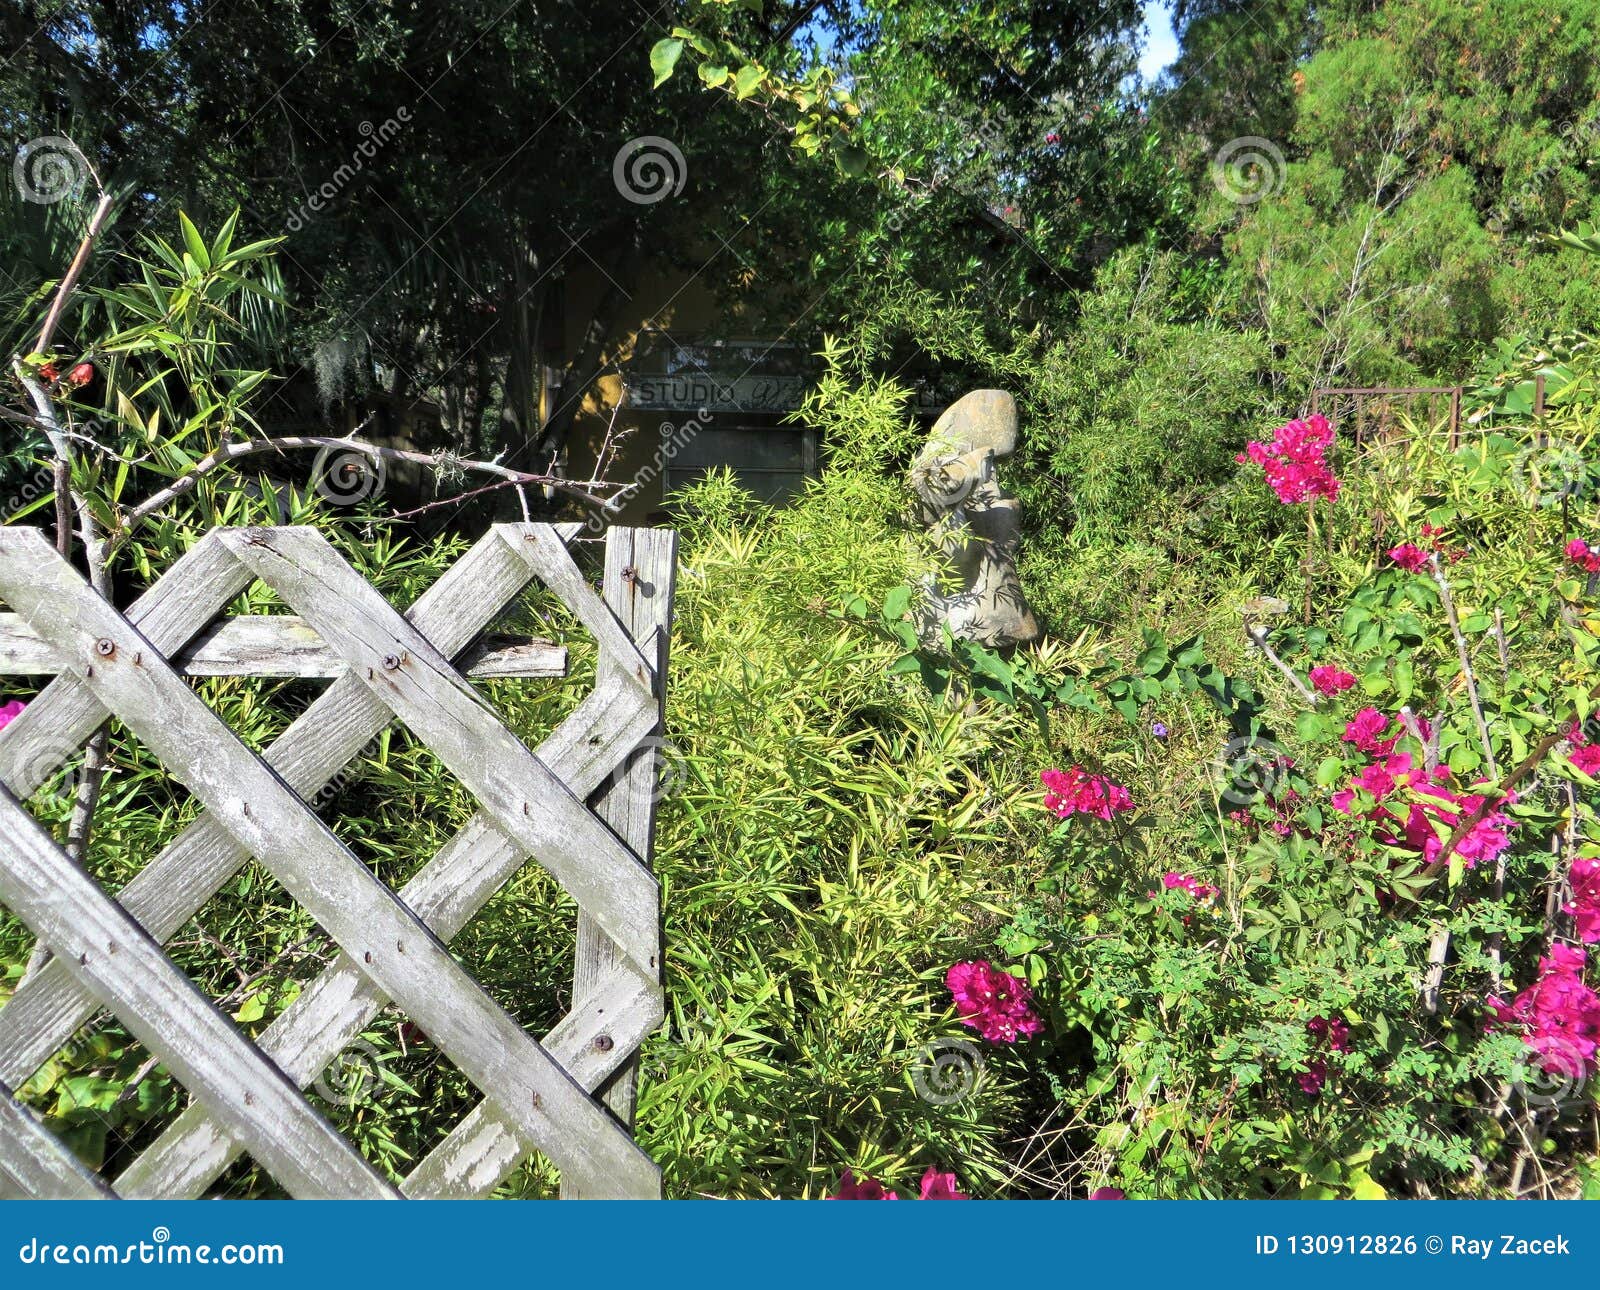 garden with sculpture, tampa, florida stock photo - image of